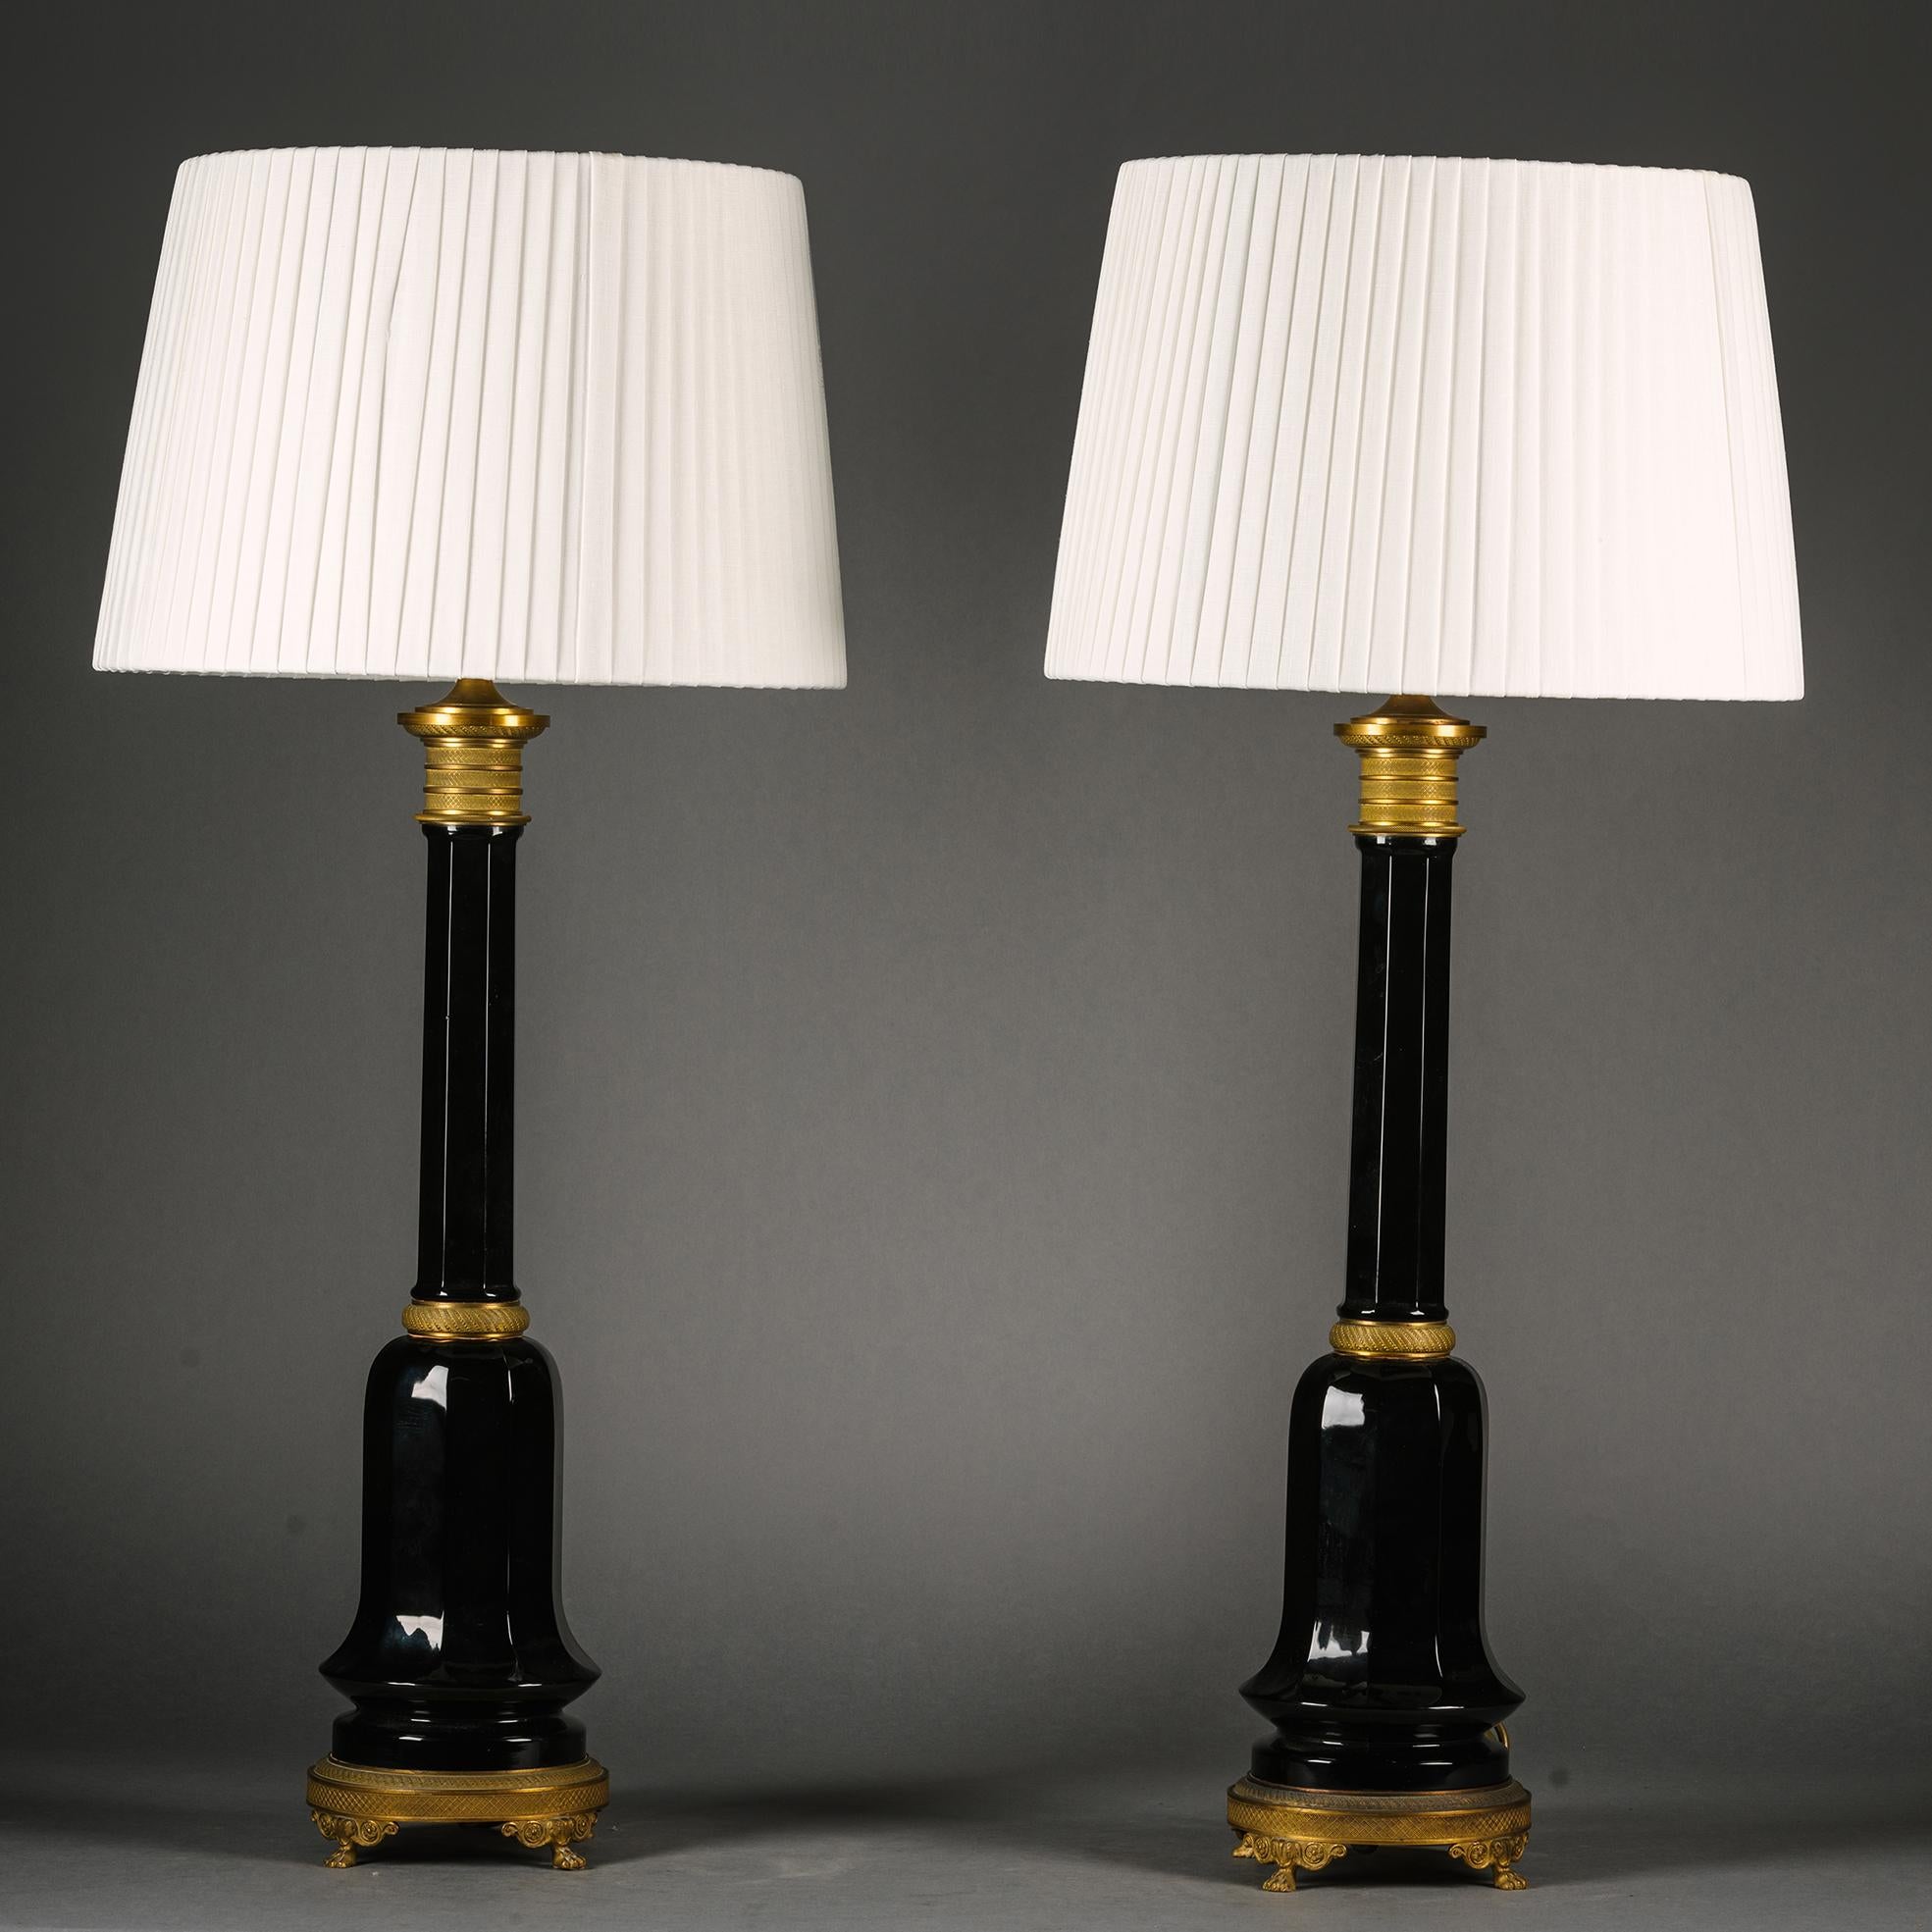 A Pair of Gilt-Bronze and Ruby Glass Table Lamps. 

Each with hexagonal stem and tulip-shaped Bohemian glass base. The metalwork finely turned with crosshatched patterns in gilt-bronze.

Probably France. Circa 1900.

Height: not including shades 71